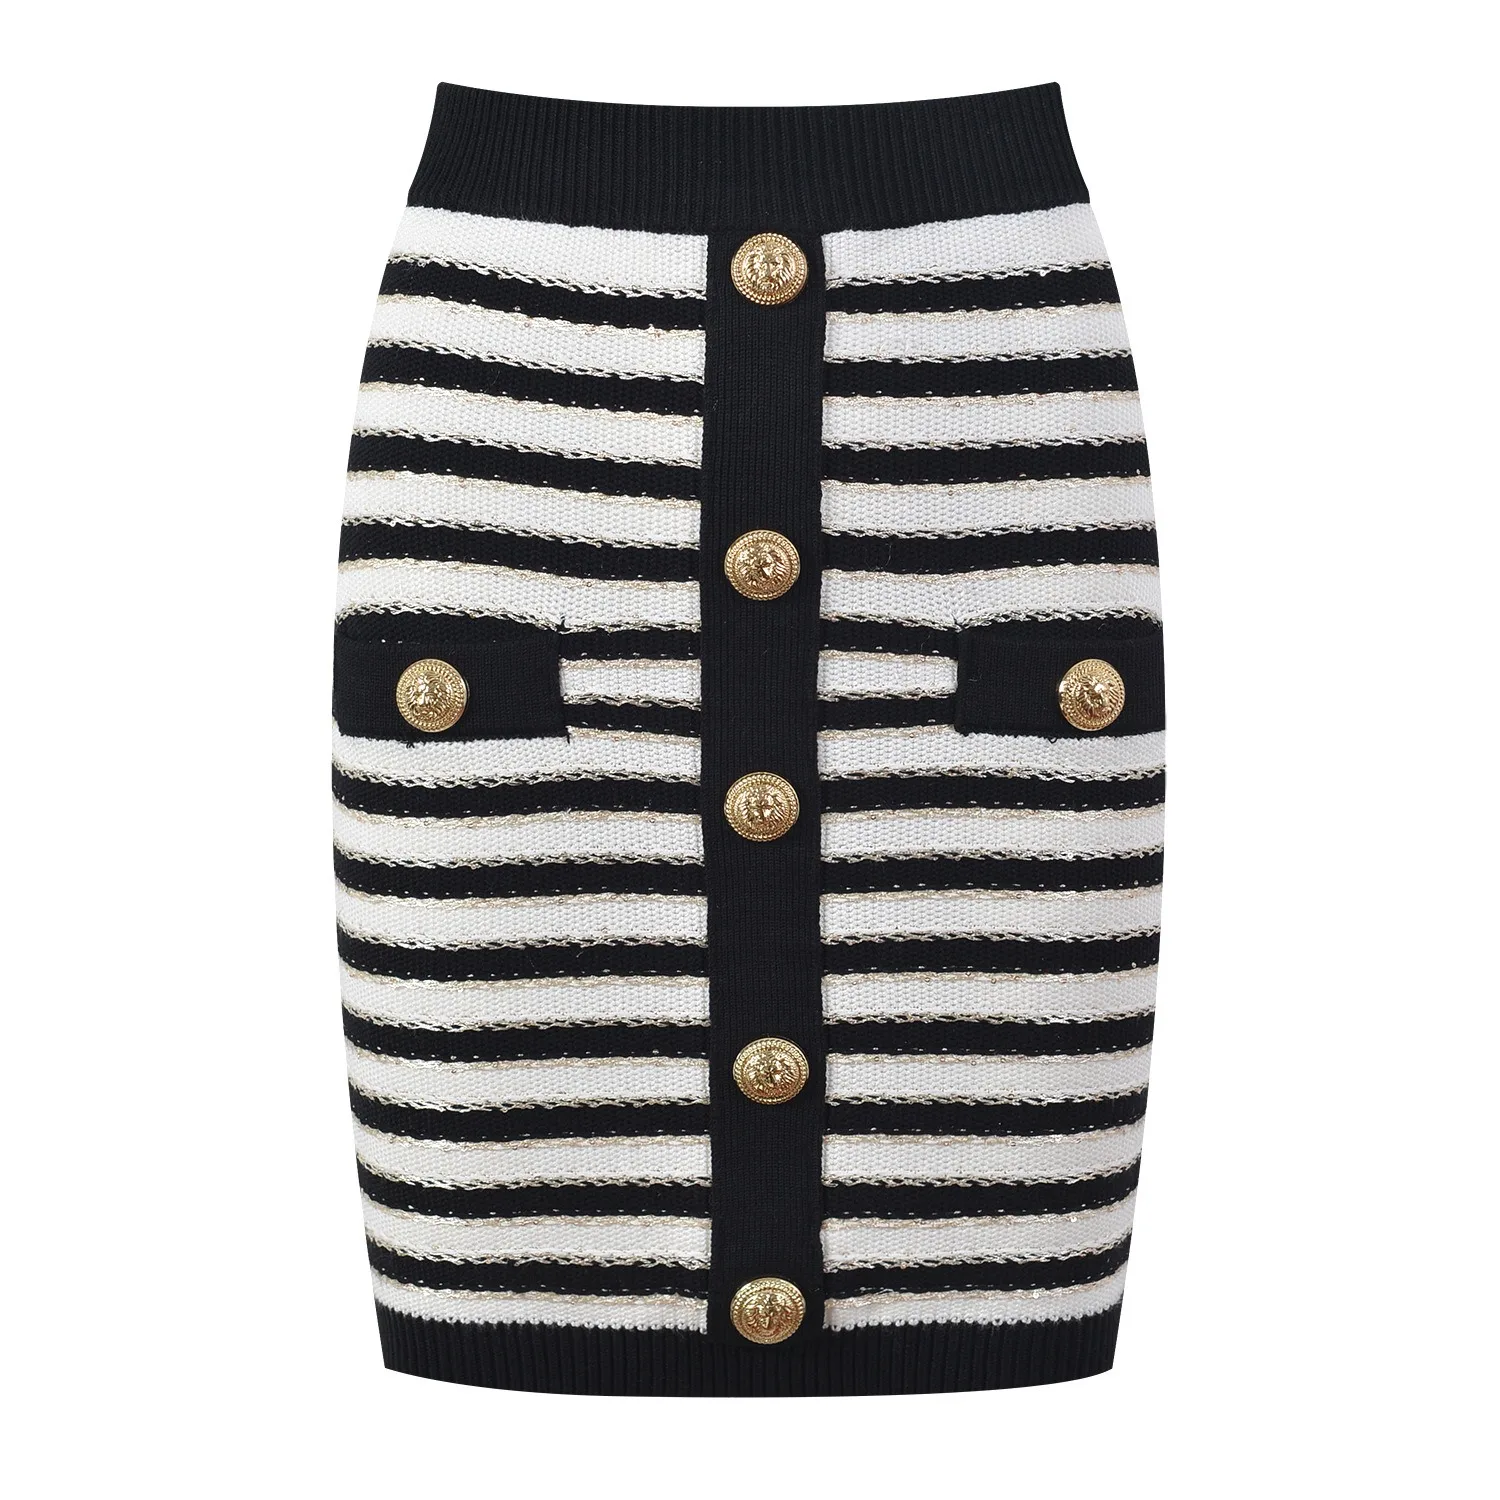 French-Stylish-O-neck-Casual-Short-Sleeve-Striped-Gold-Thread-Knitted-Sweater-Skinny-2PCS-Skirt-Sets-2